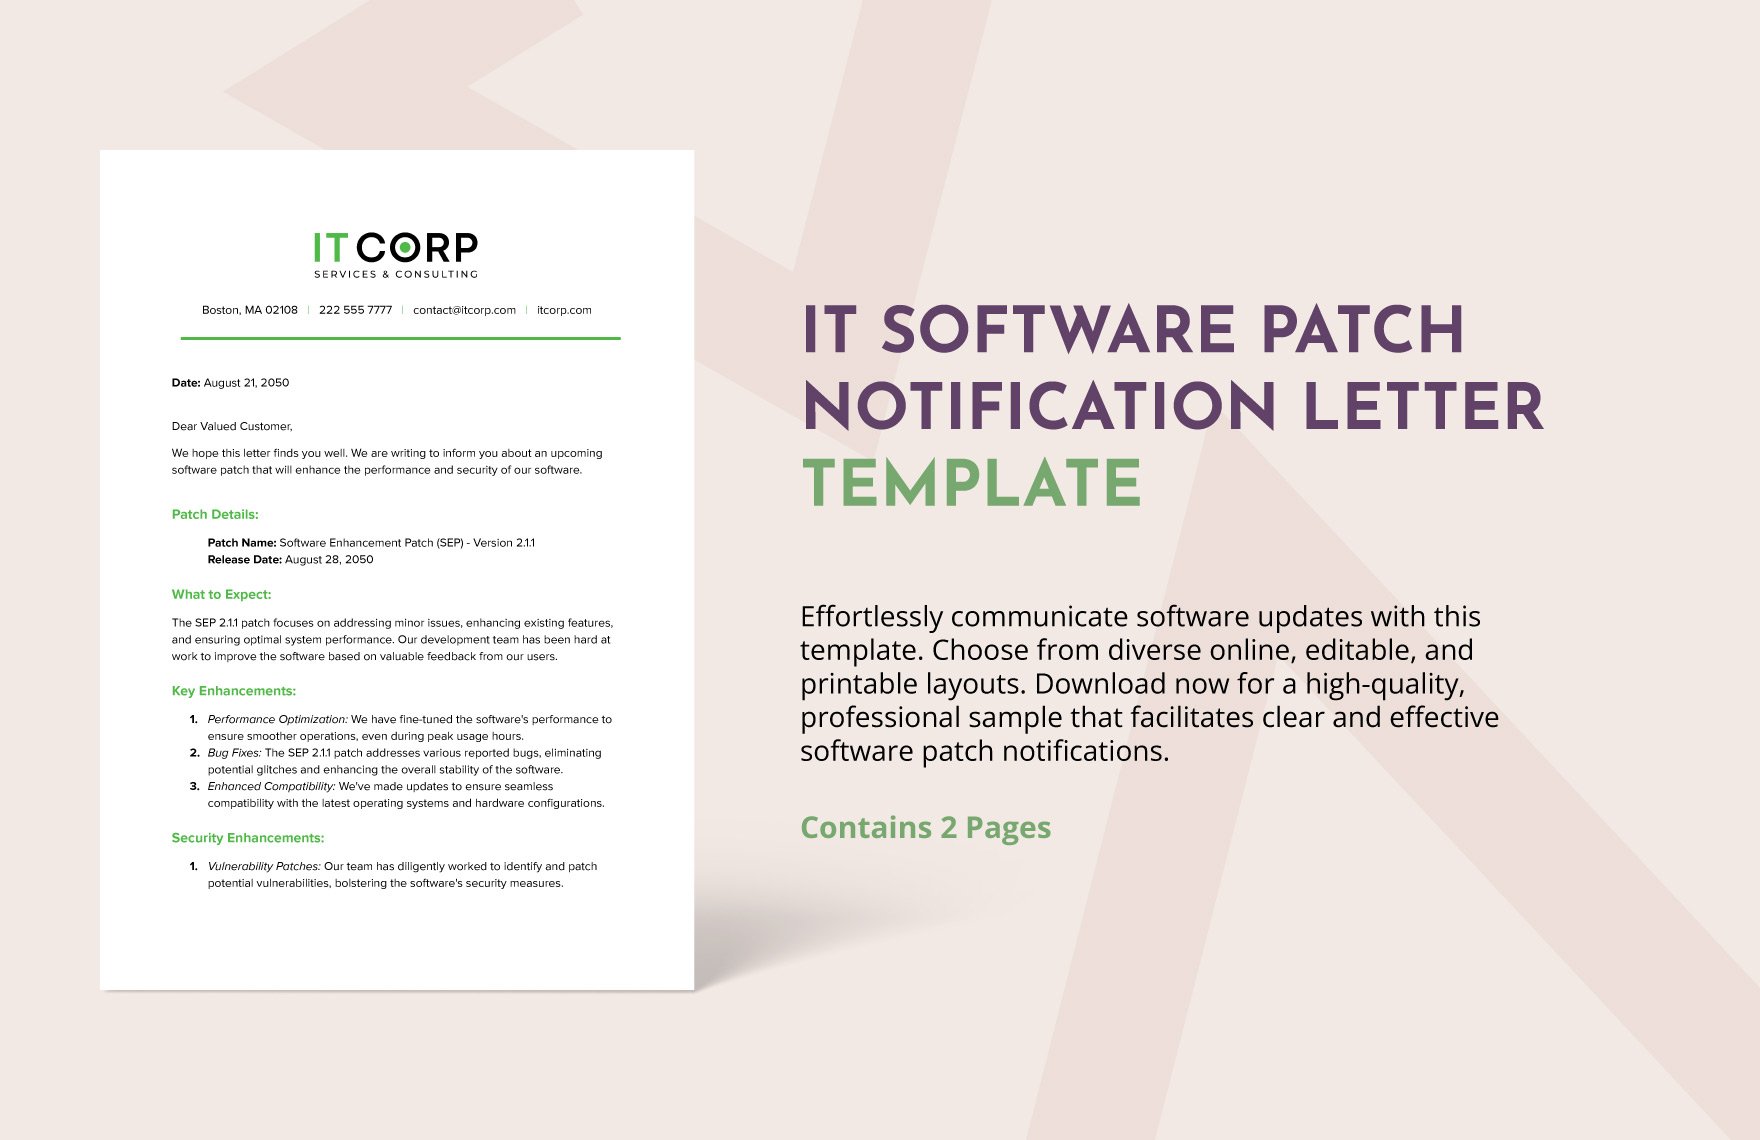 IT Software Patch Notification Letter Template